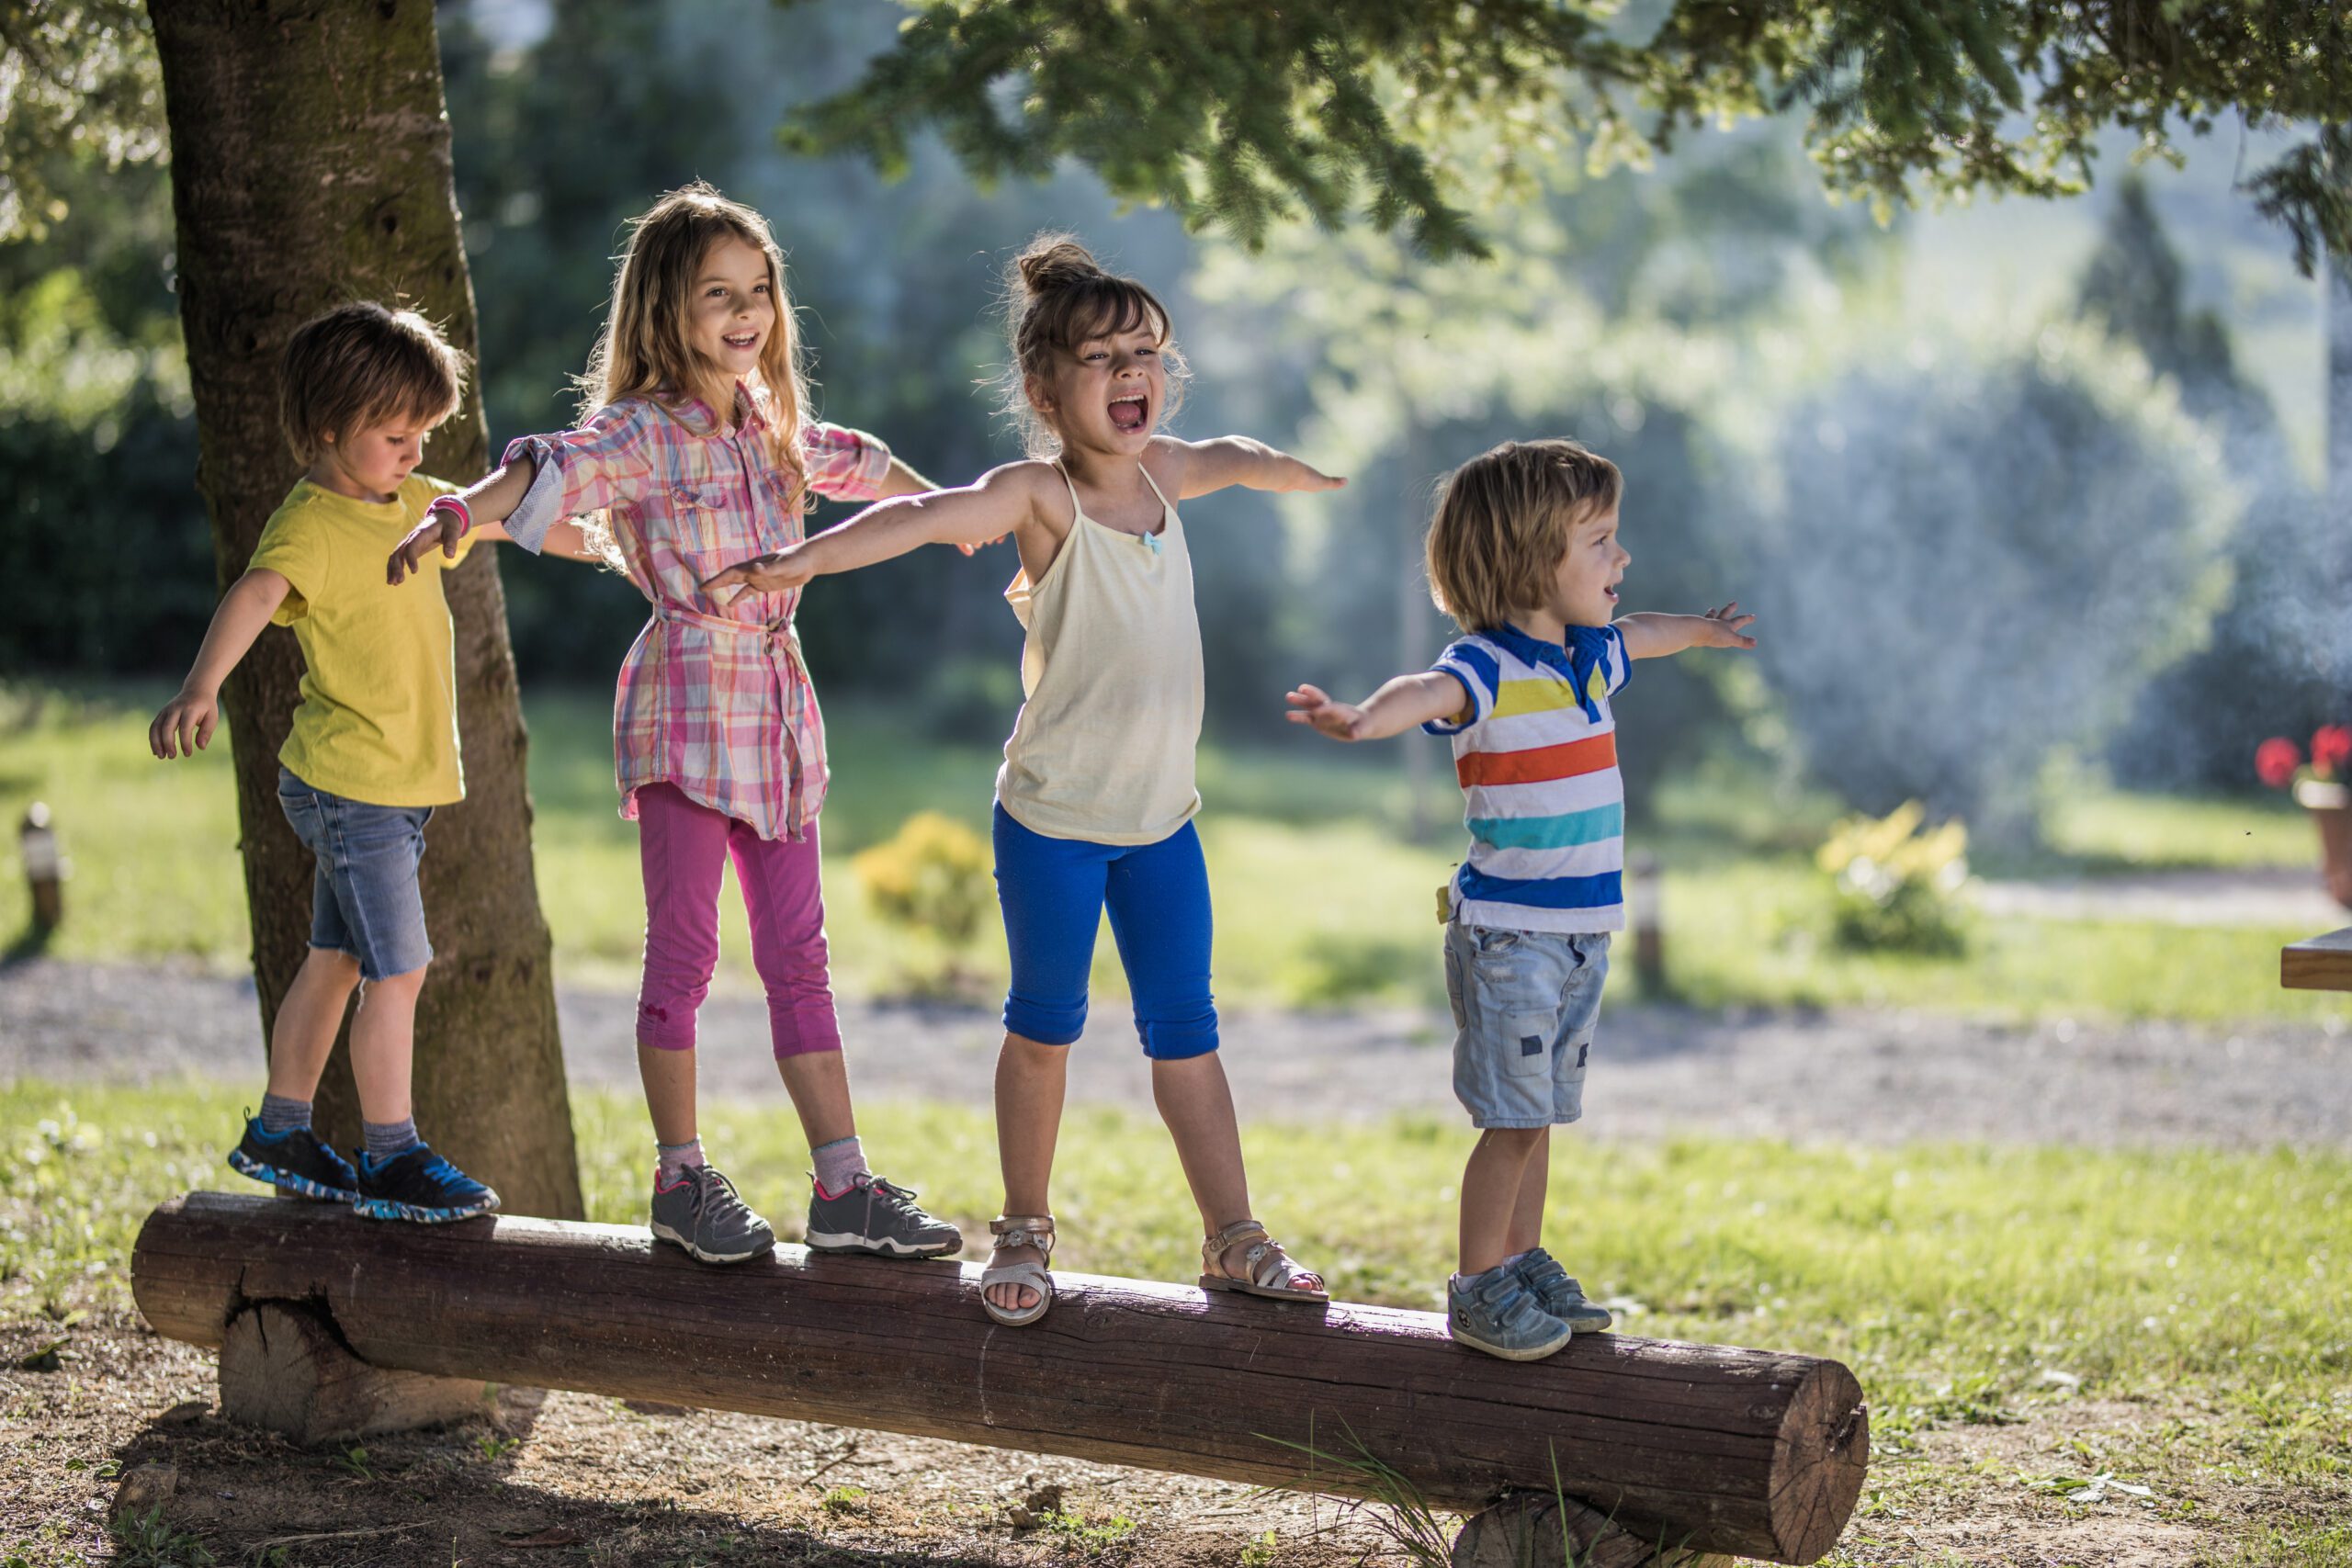 Group of small kids walking on a tree trunk in nature.